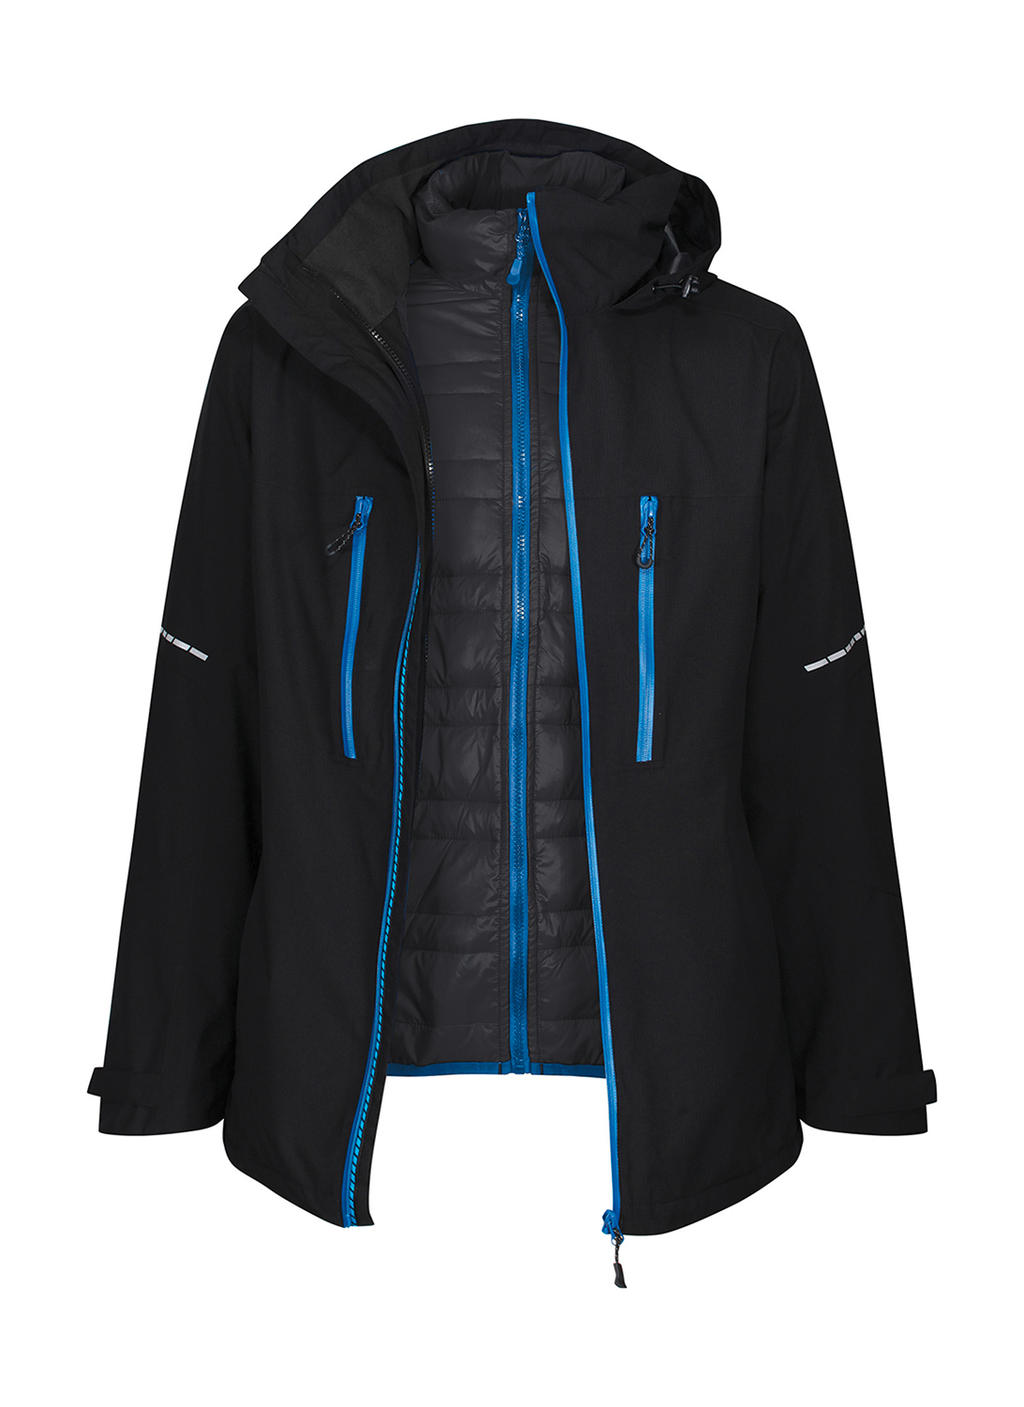  X-Pro Evader III 3 in1 Jacket in Farbe Black/Oxford Blue